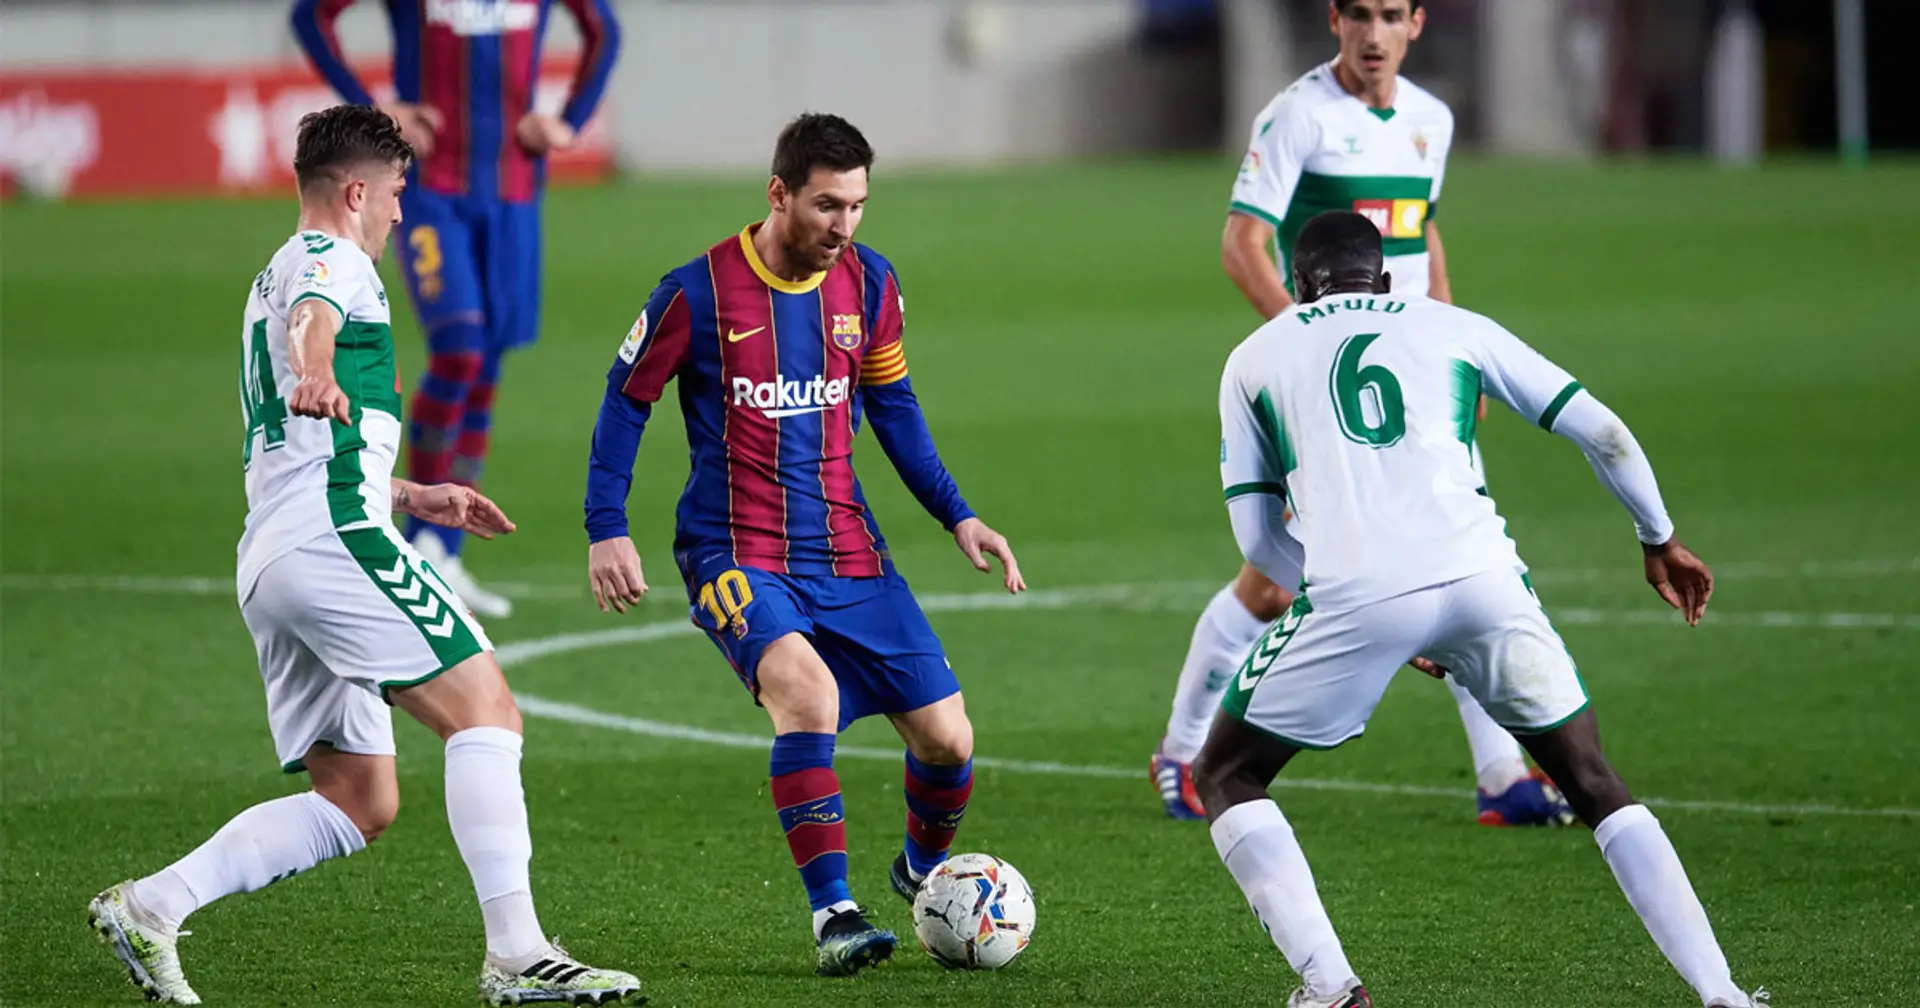 Leo Messi becomes 1st player to complete 100 dribbles in 2020/21 La Liga season